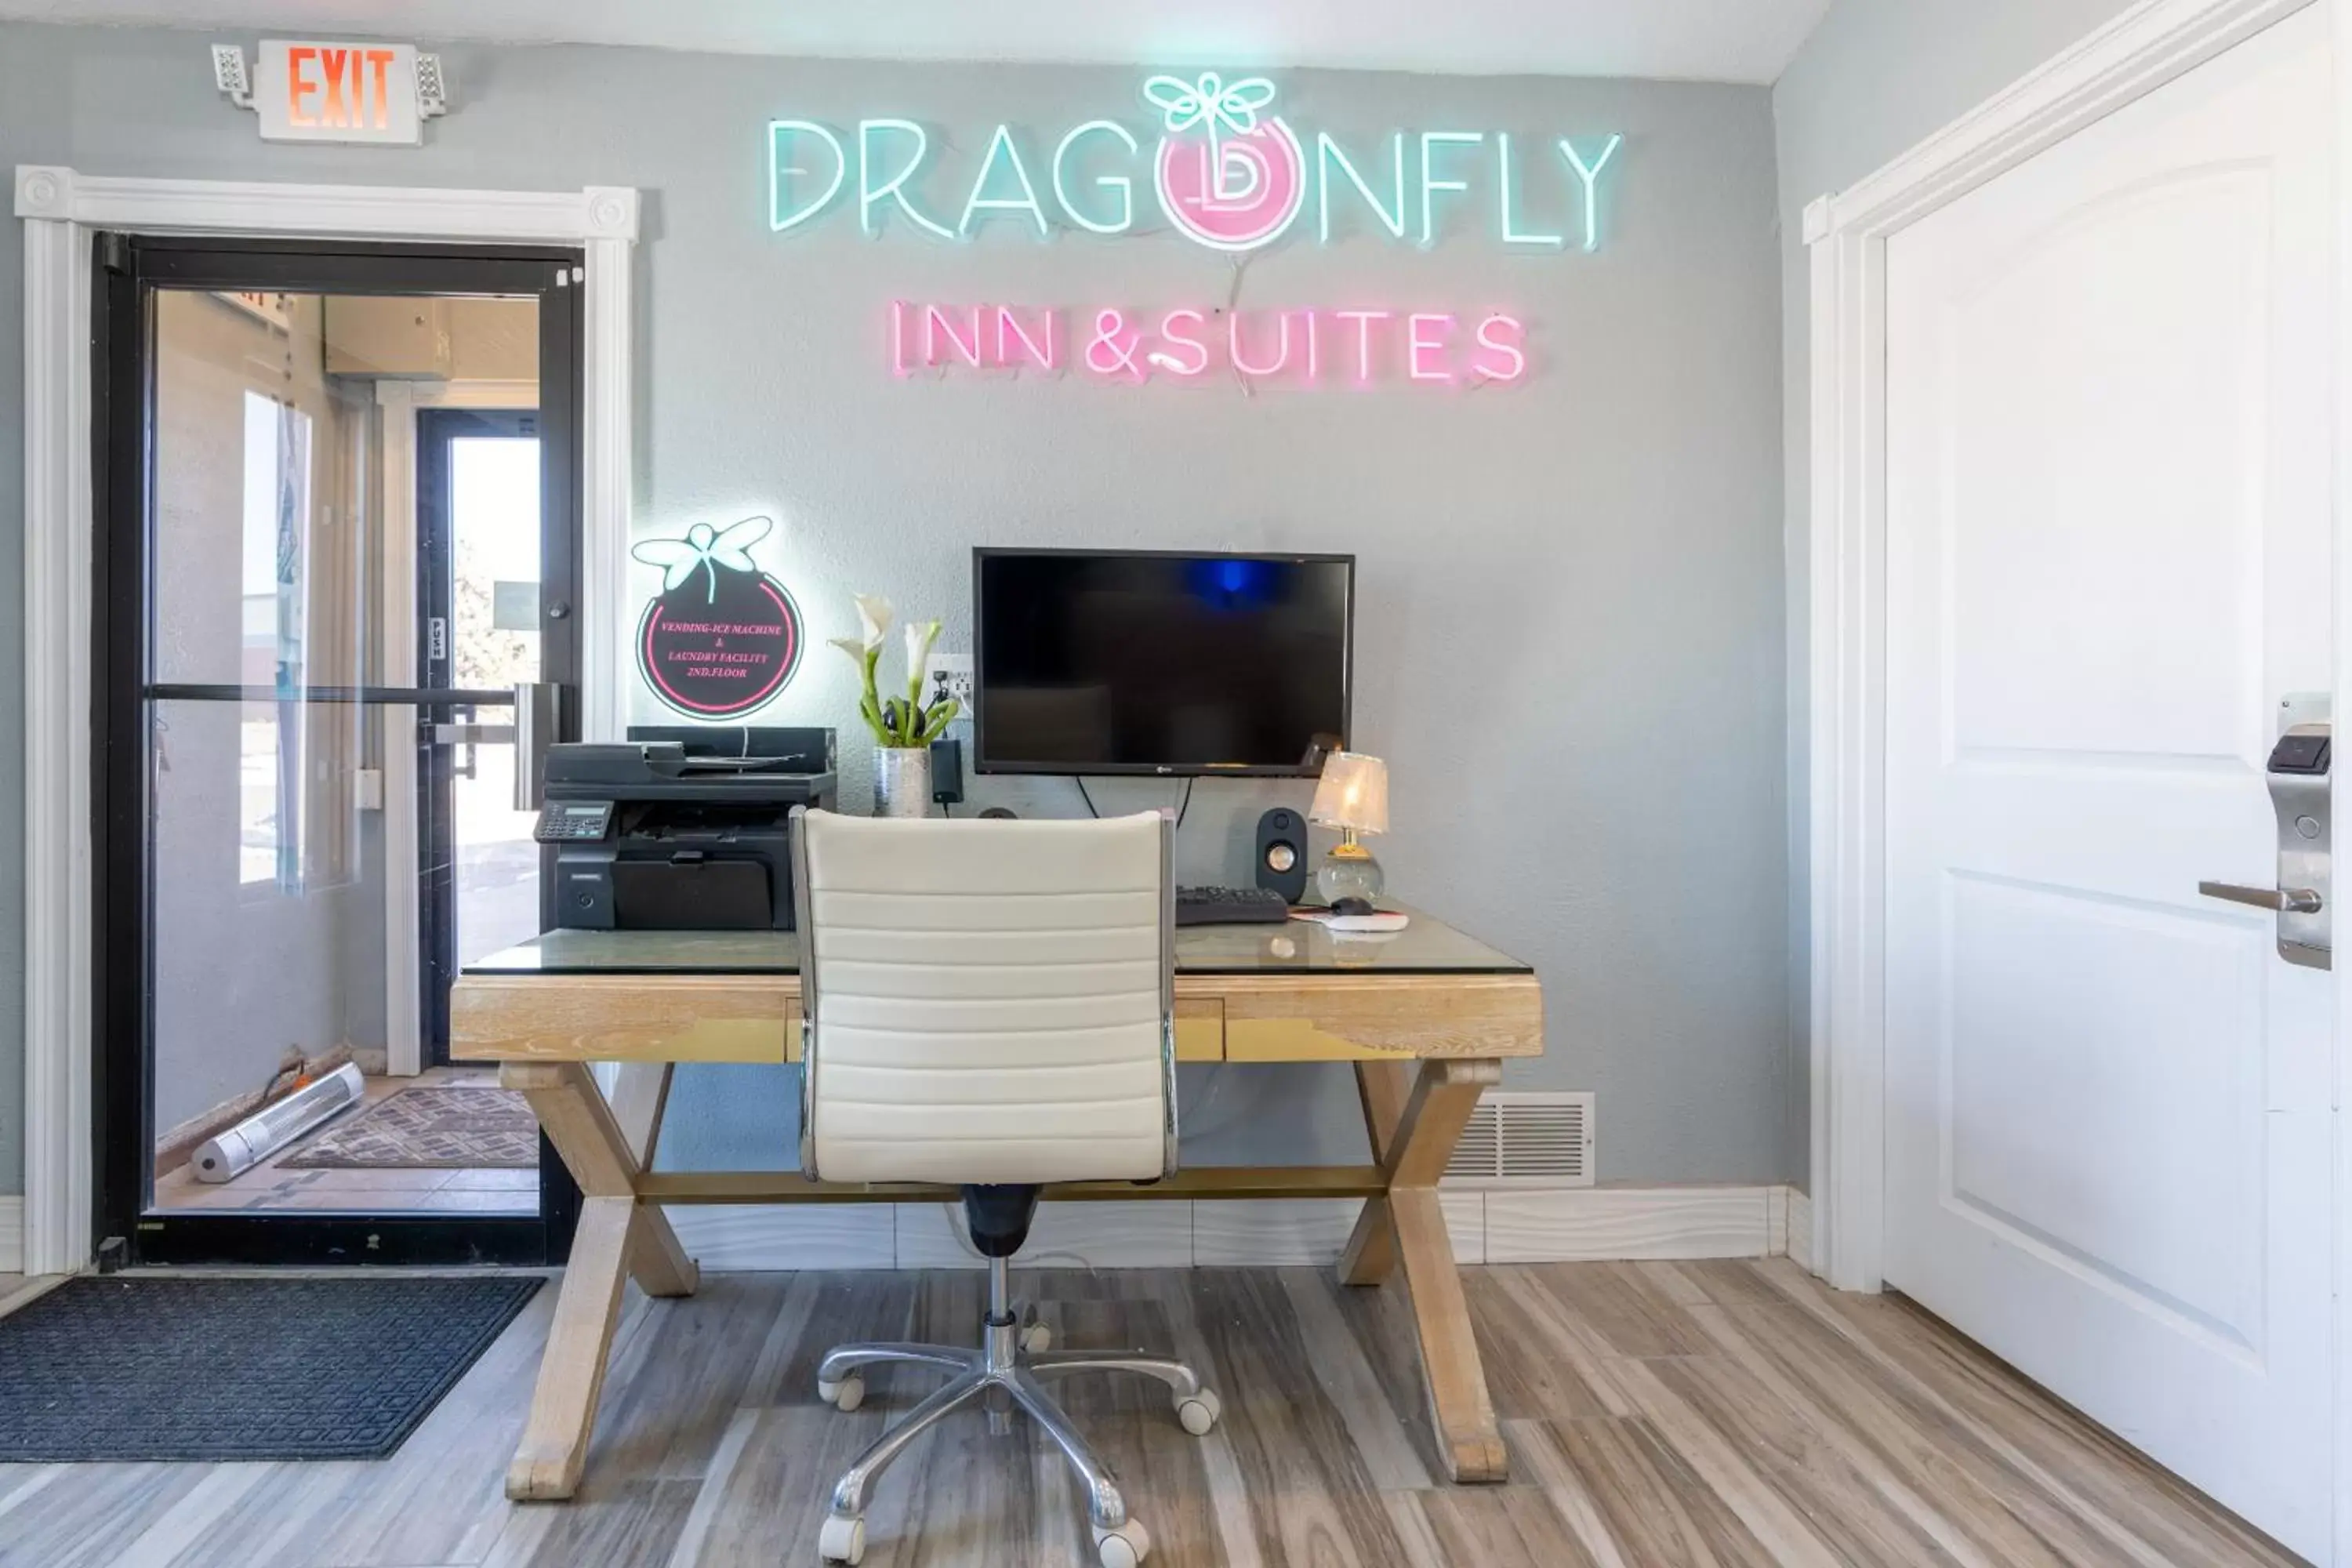 Property building, TV/Entertainment Center in Dragonfly Inn & Suites